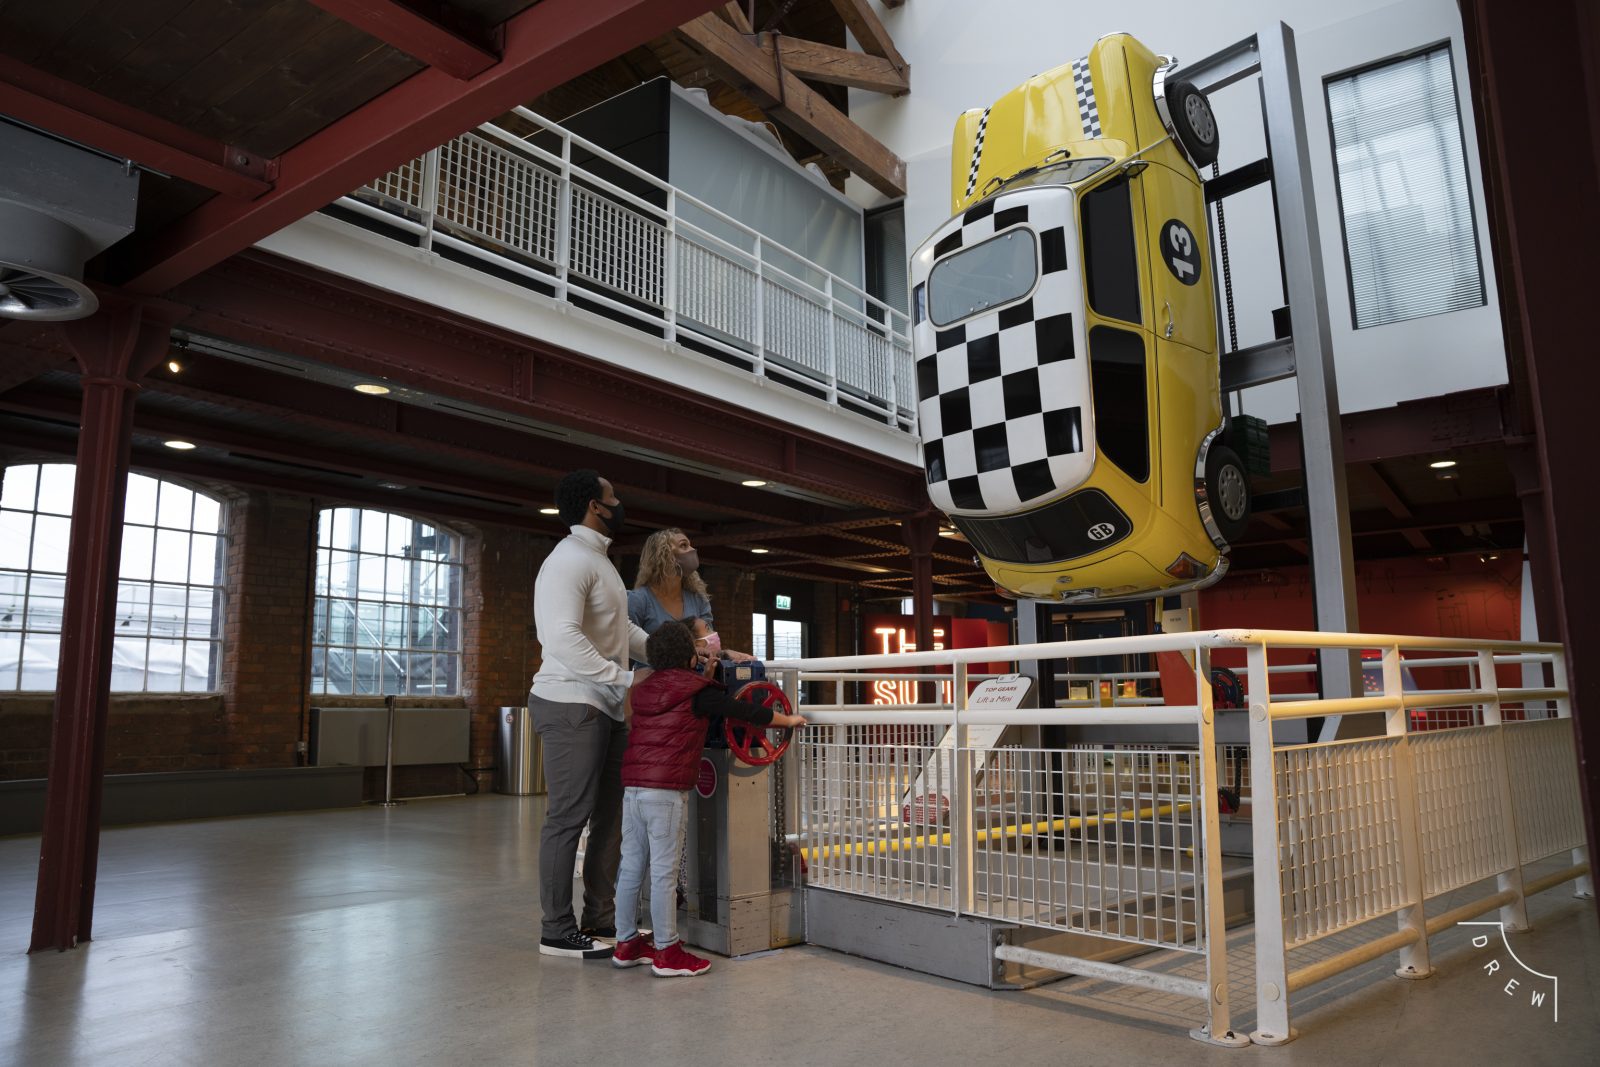 Celebrate Manchester firsts at the Science and Industry Museum this half term, The Manc